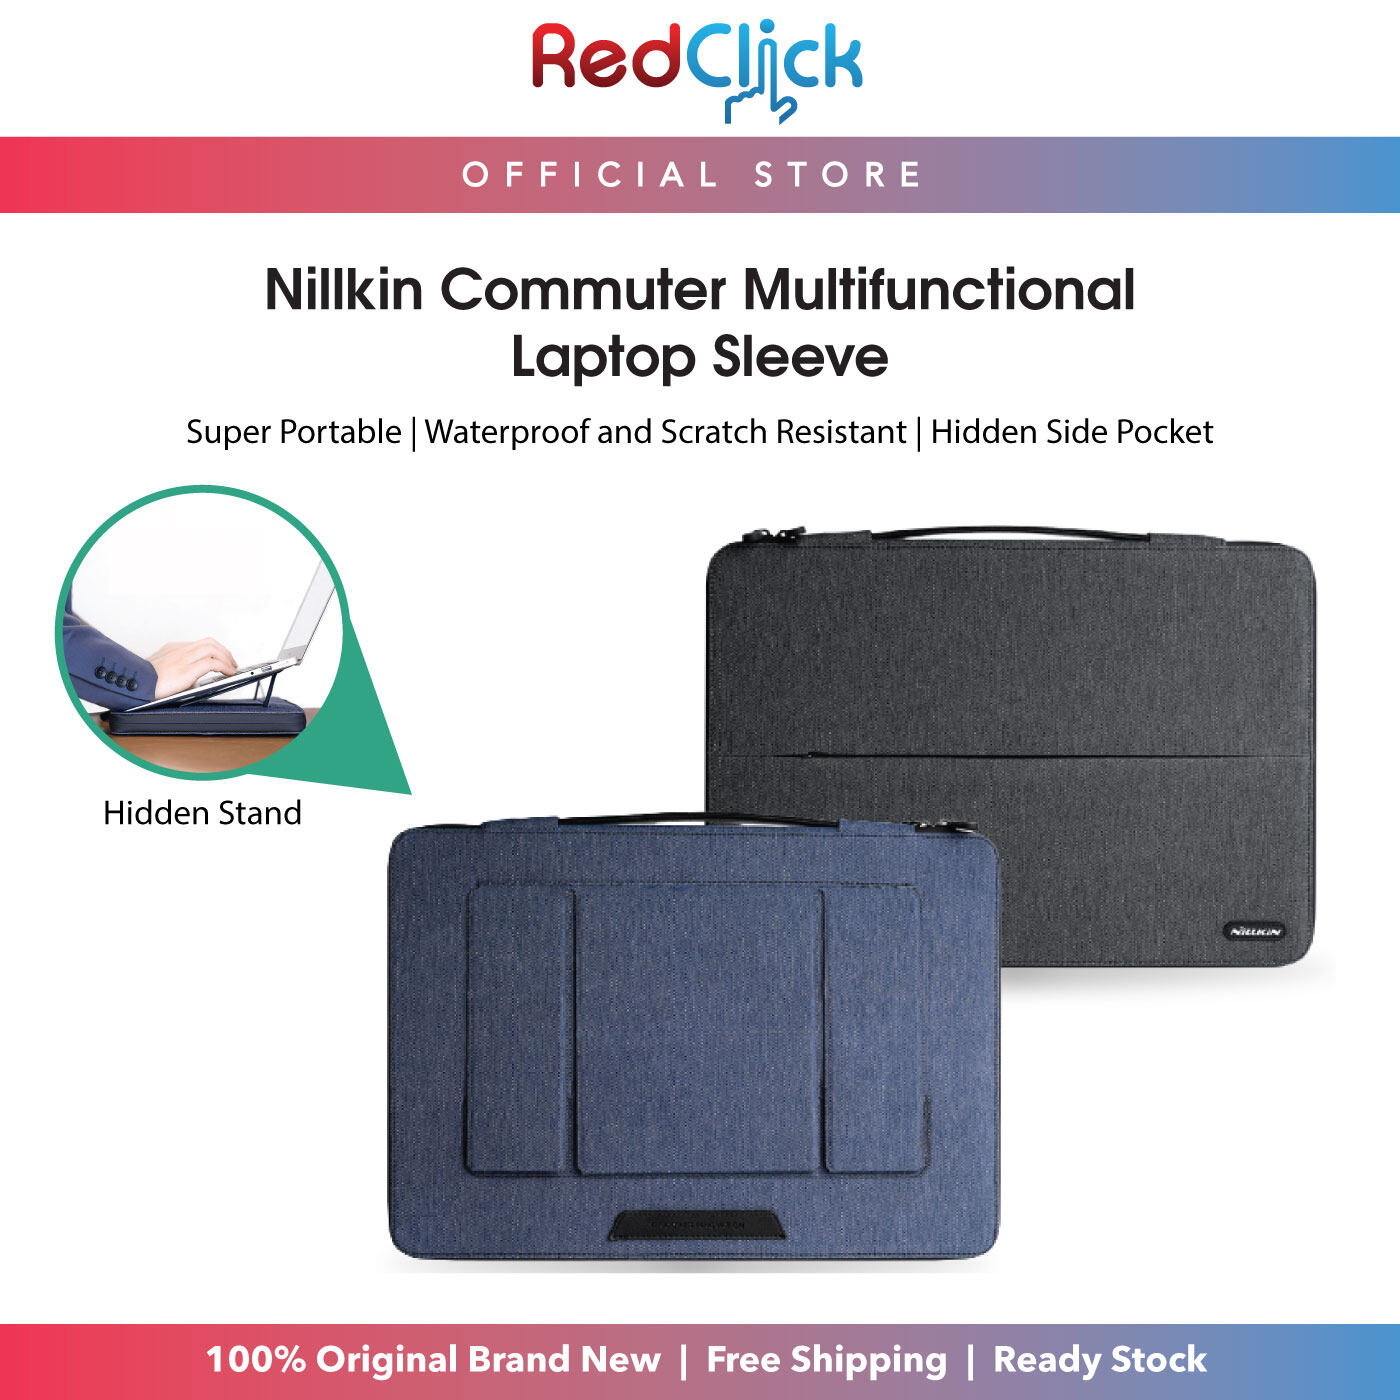 Nillkin Commuter Multifunctional Laptop Sleeve Hidden Adjustable Stand Waterproof And Scratch Resistant Compatible Up to 16.1" Laptop